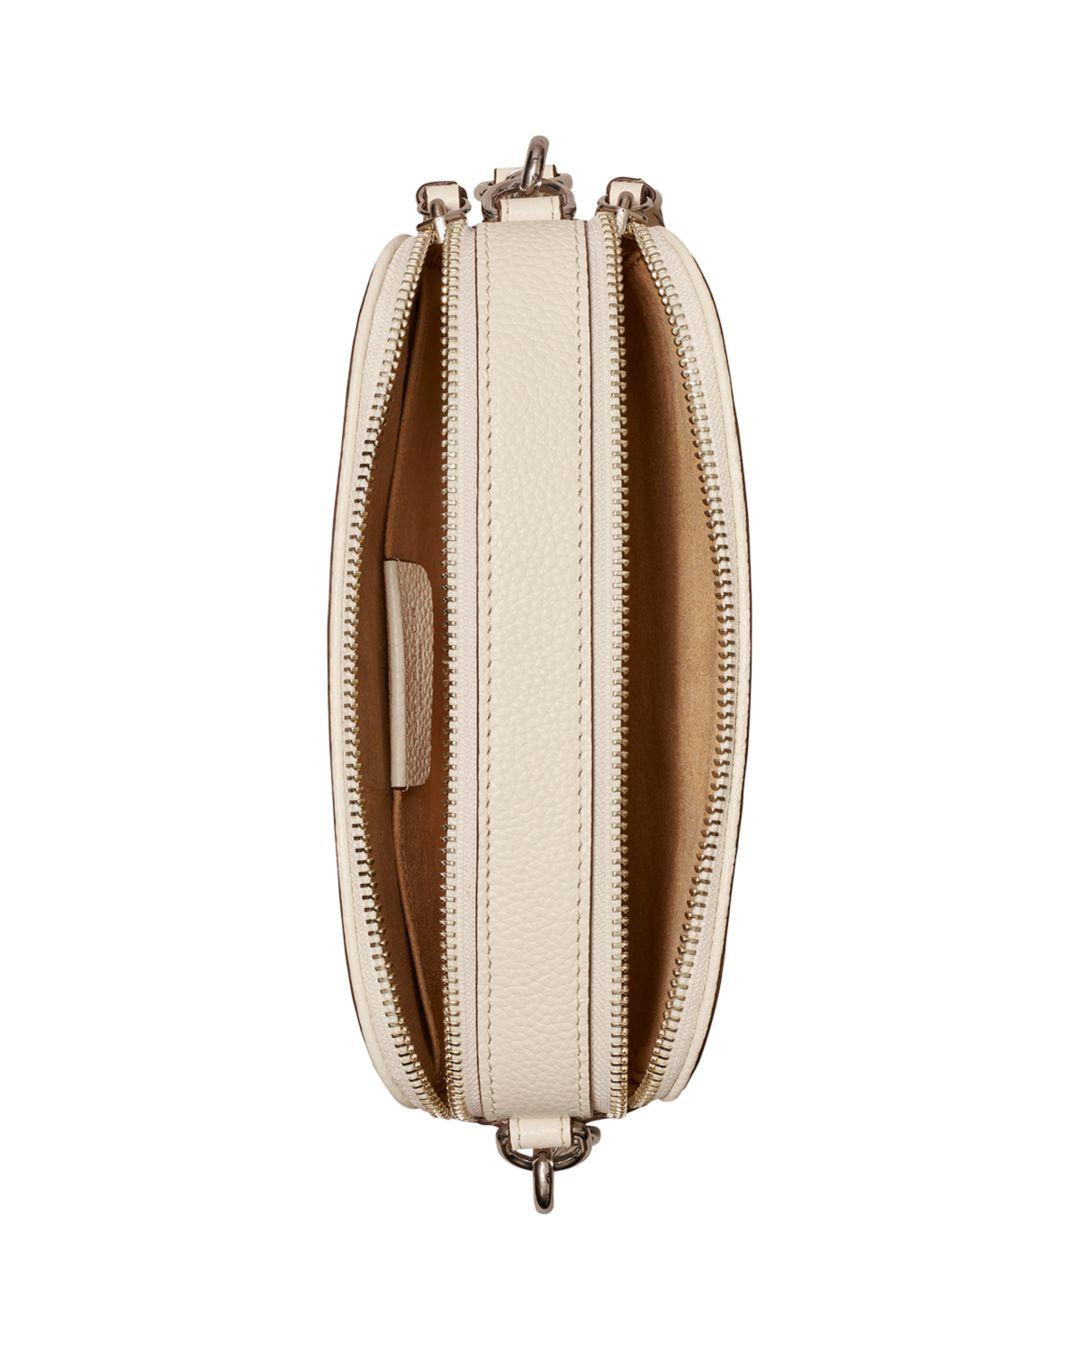 Tory Burch Mini Miller Leather Crossbody Bag in Natural | Lyst